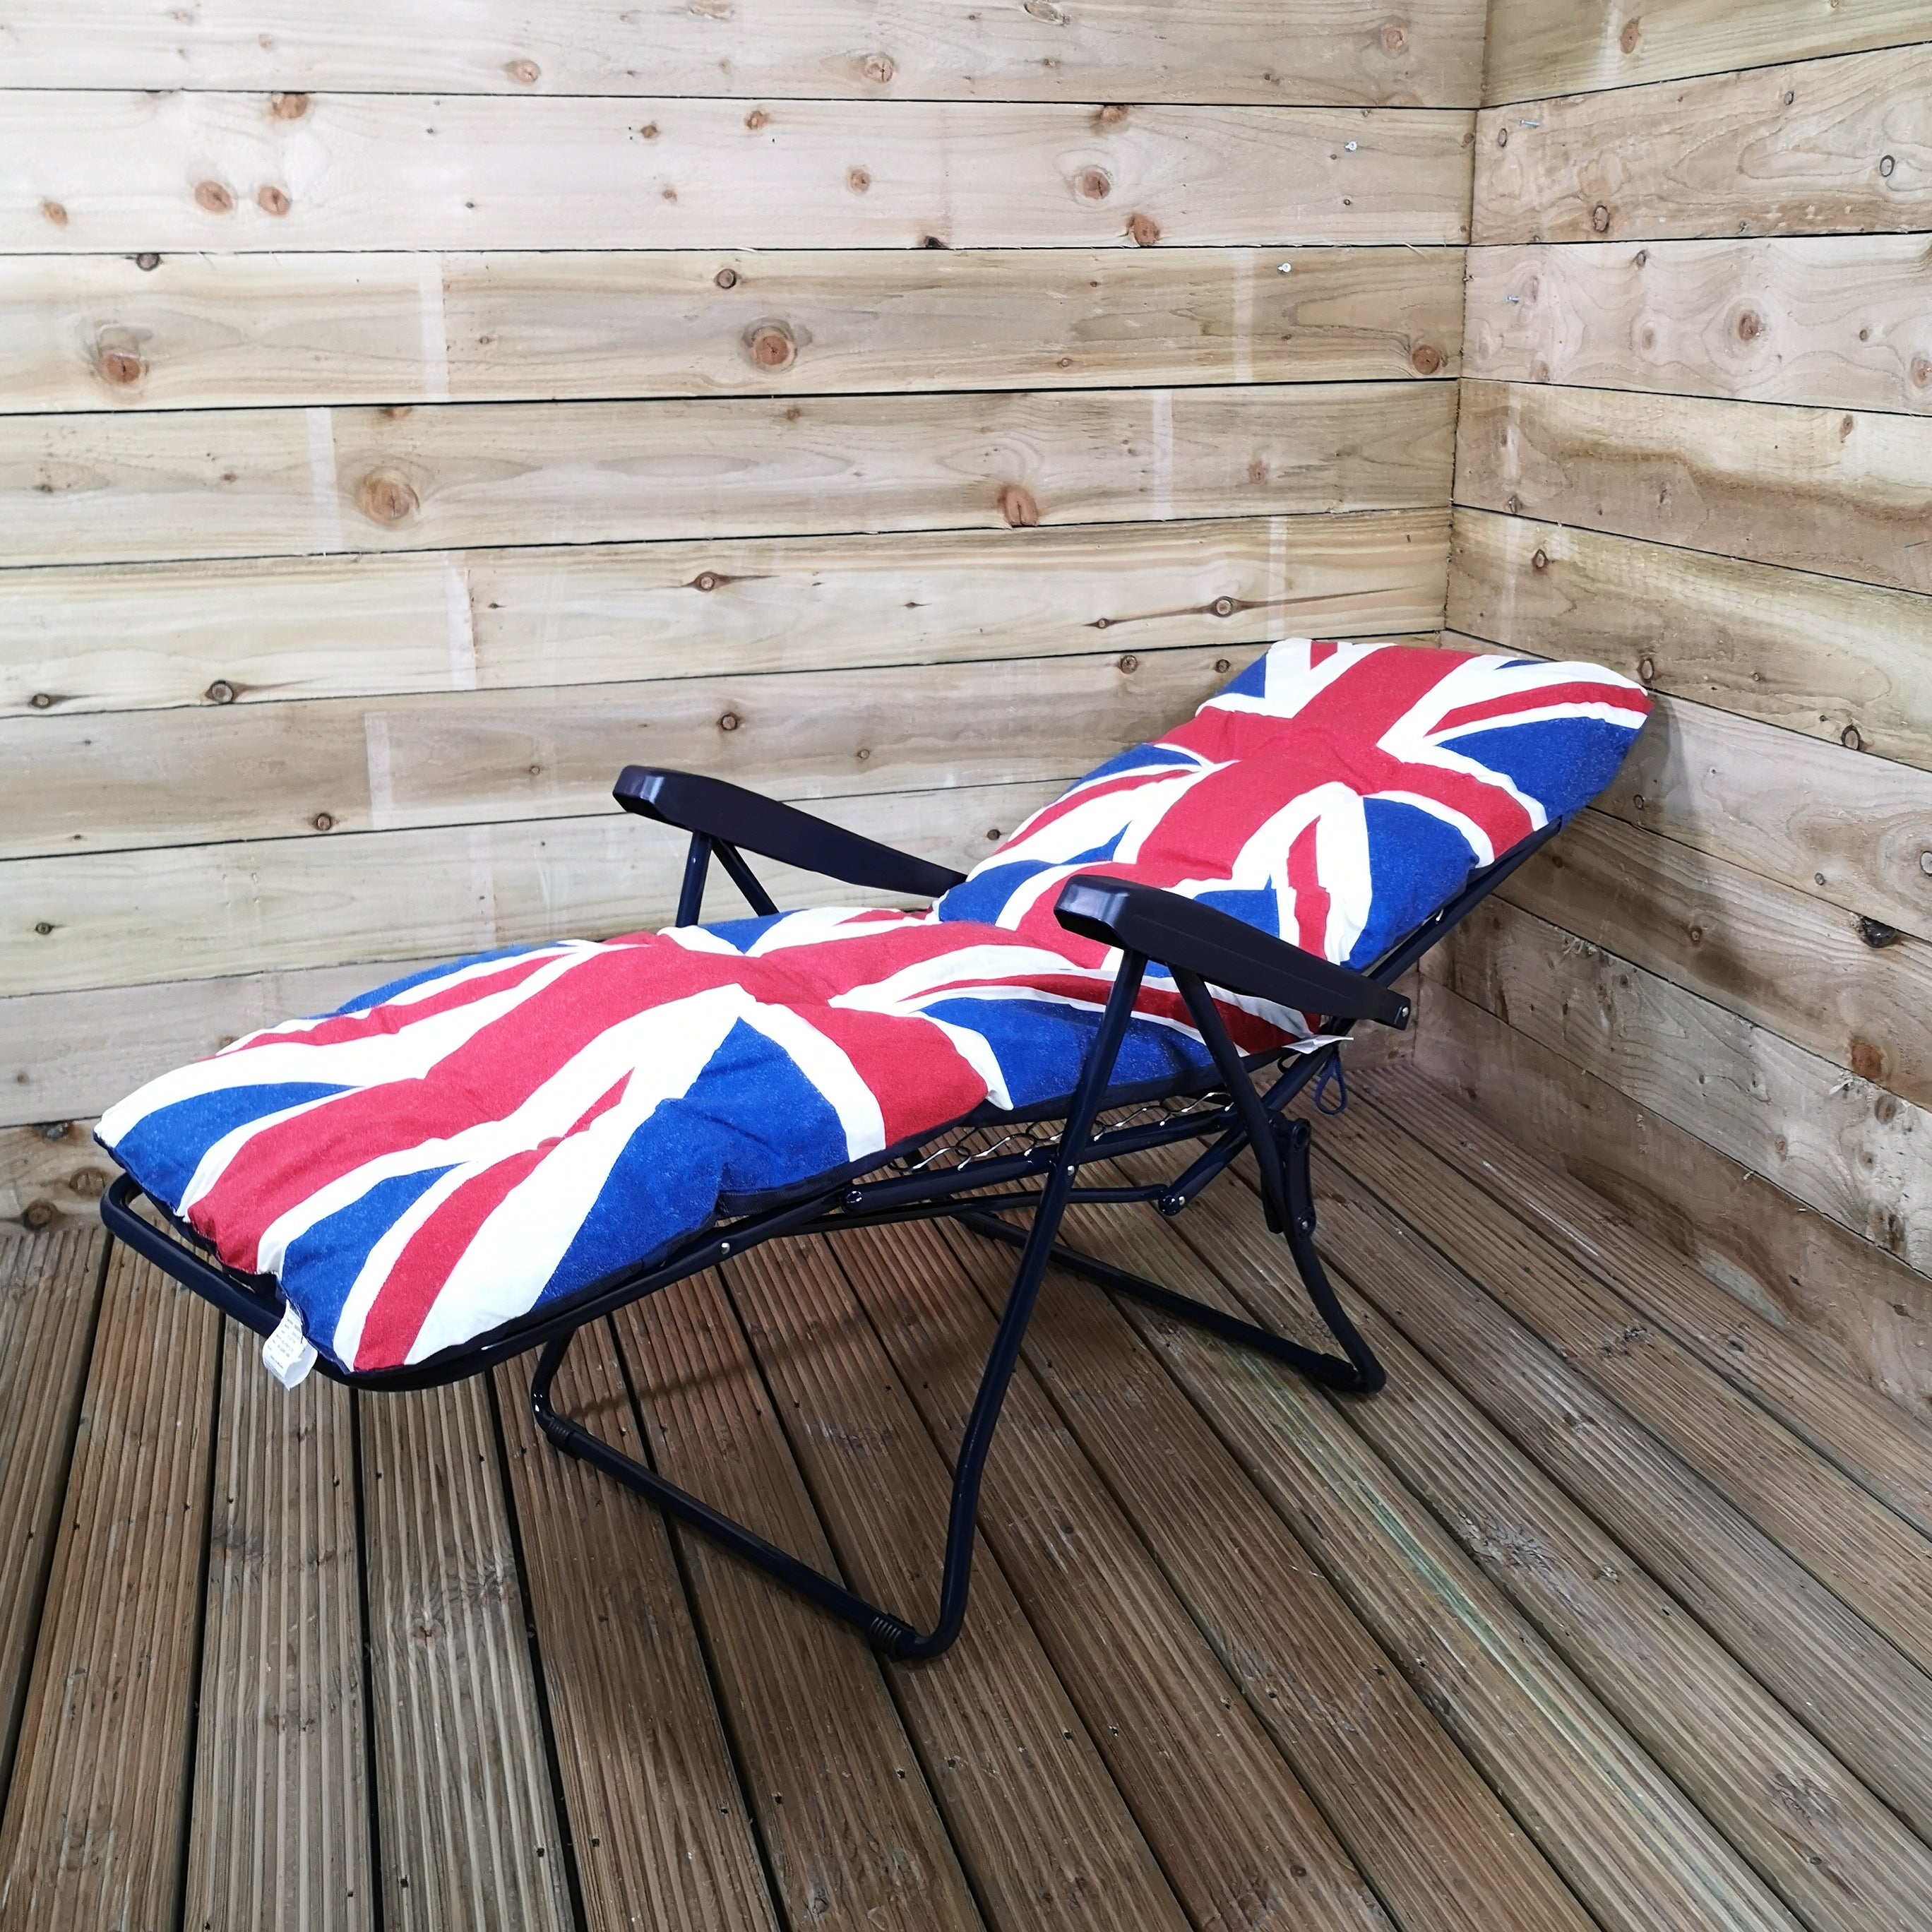 Pack of Two Union Jack King Coronation Padded Outdoor Garden Patio Recliners / Sun Loungers